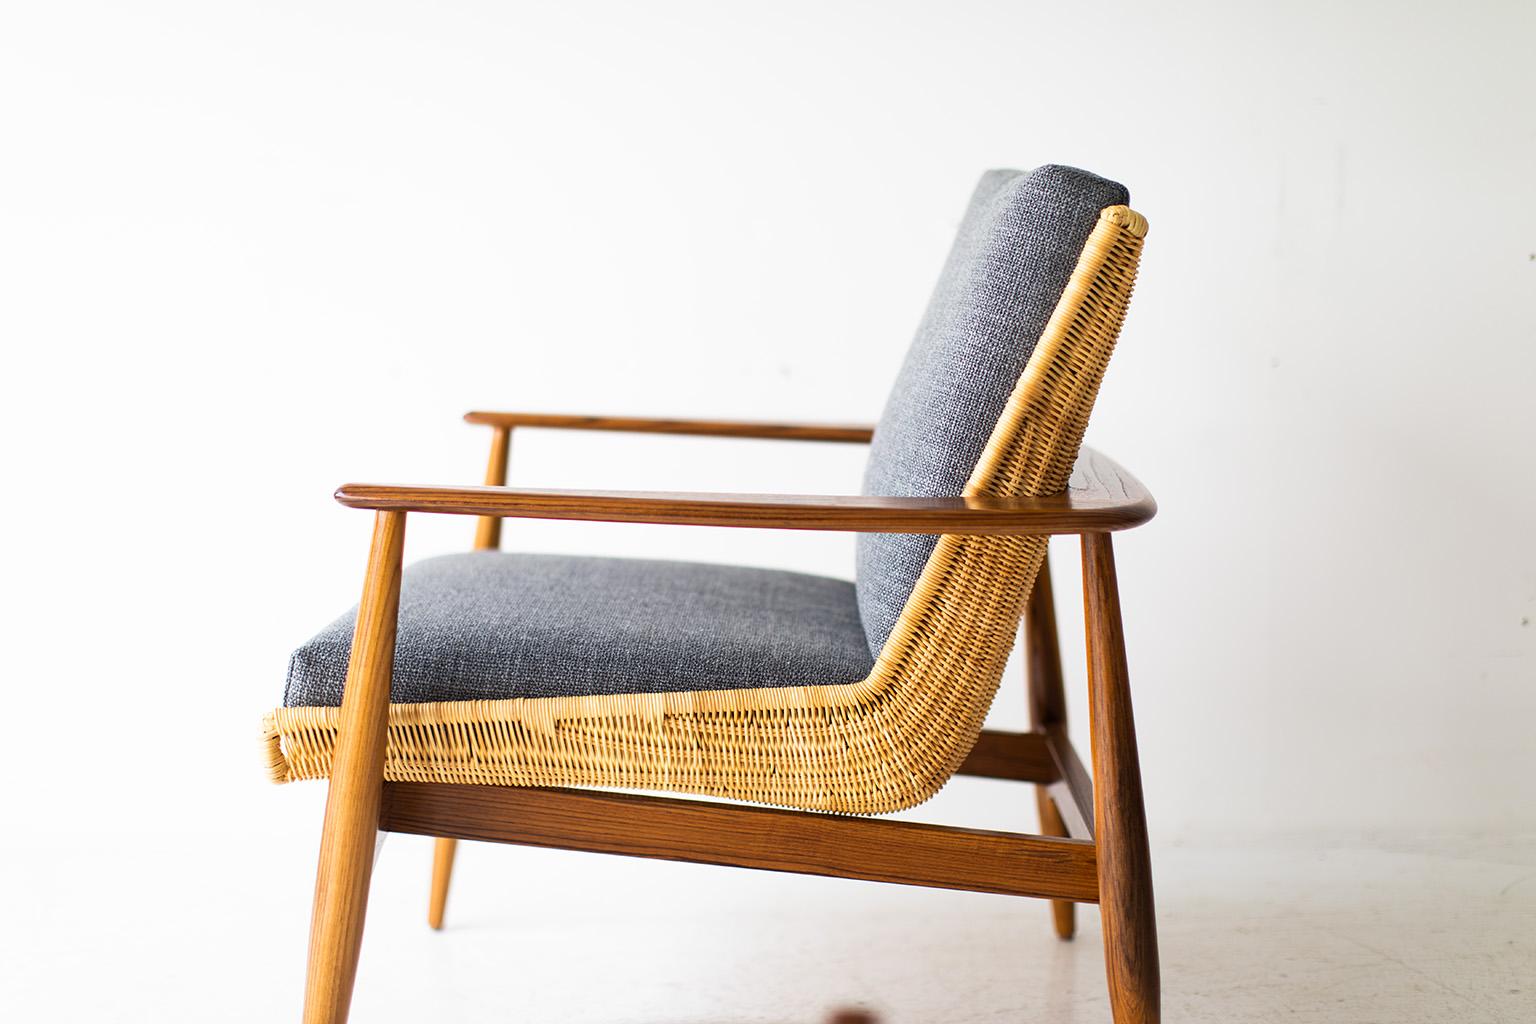 Peabody Wicker Chairs, Modern Wicker Chairs, Teak and Thick Weave  For Sale 3